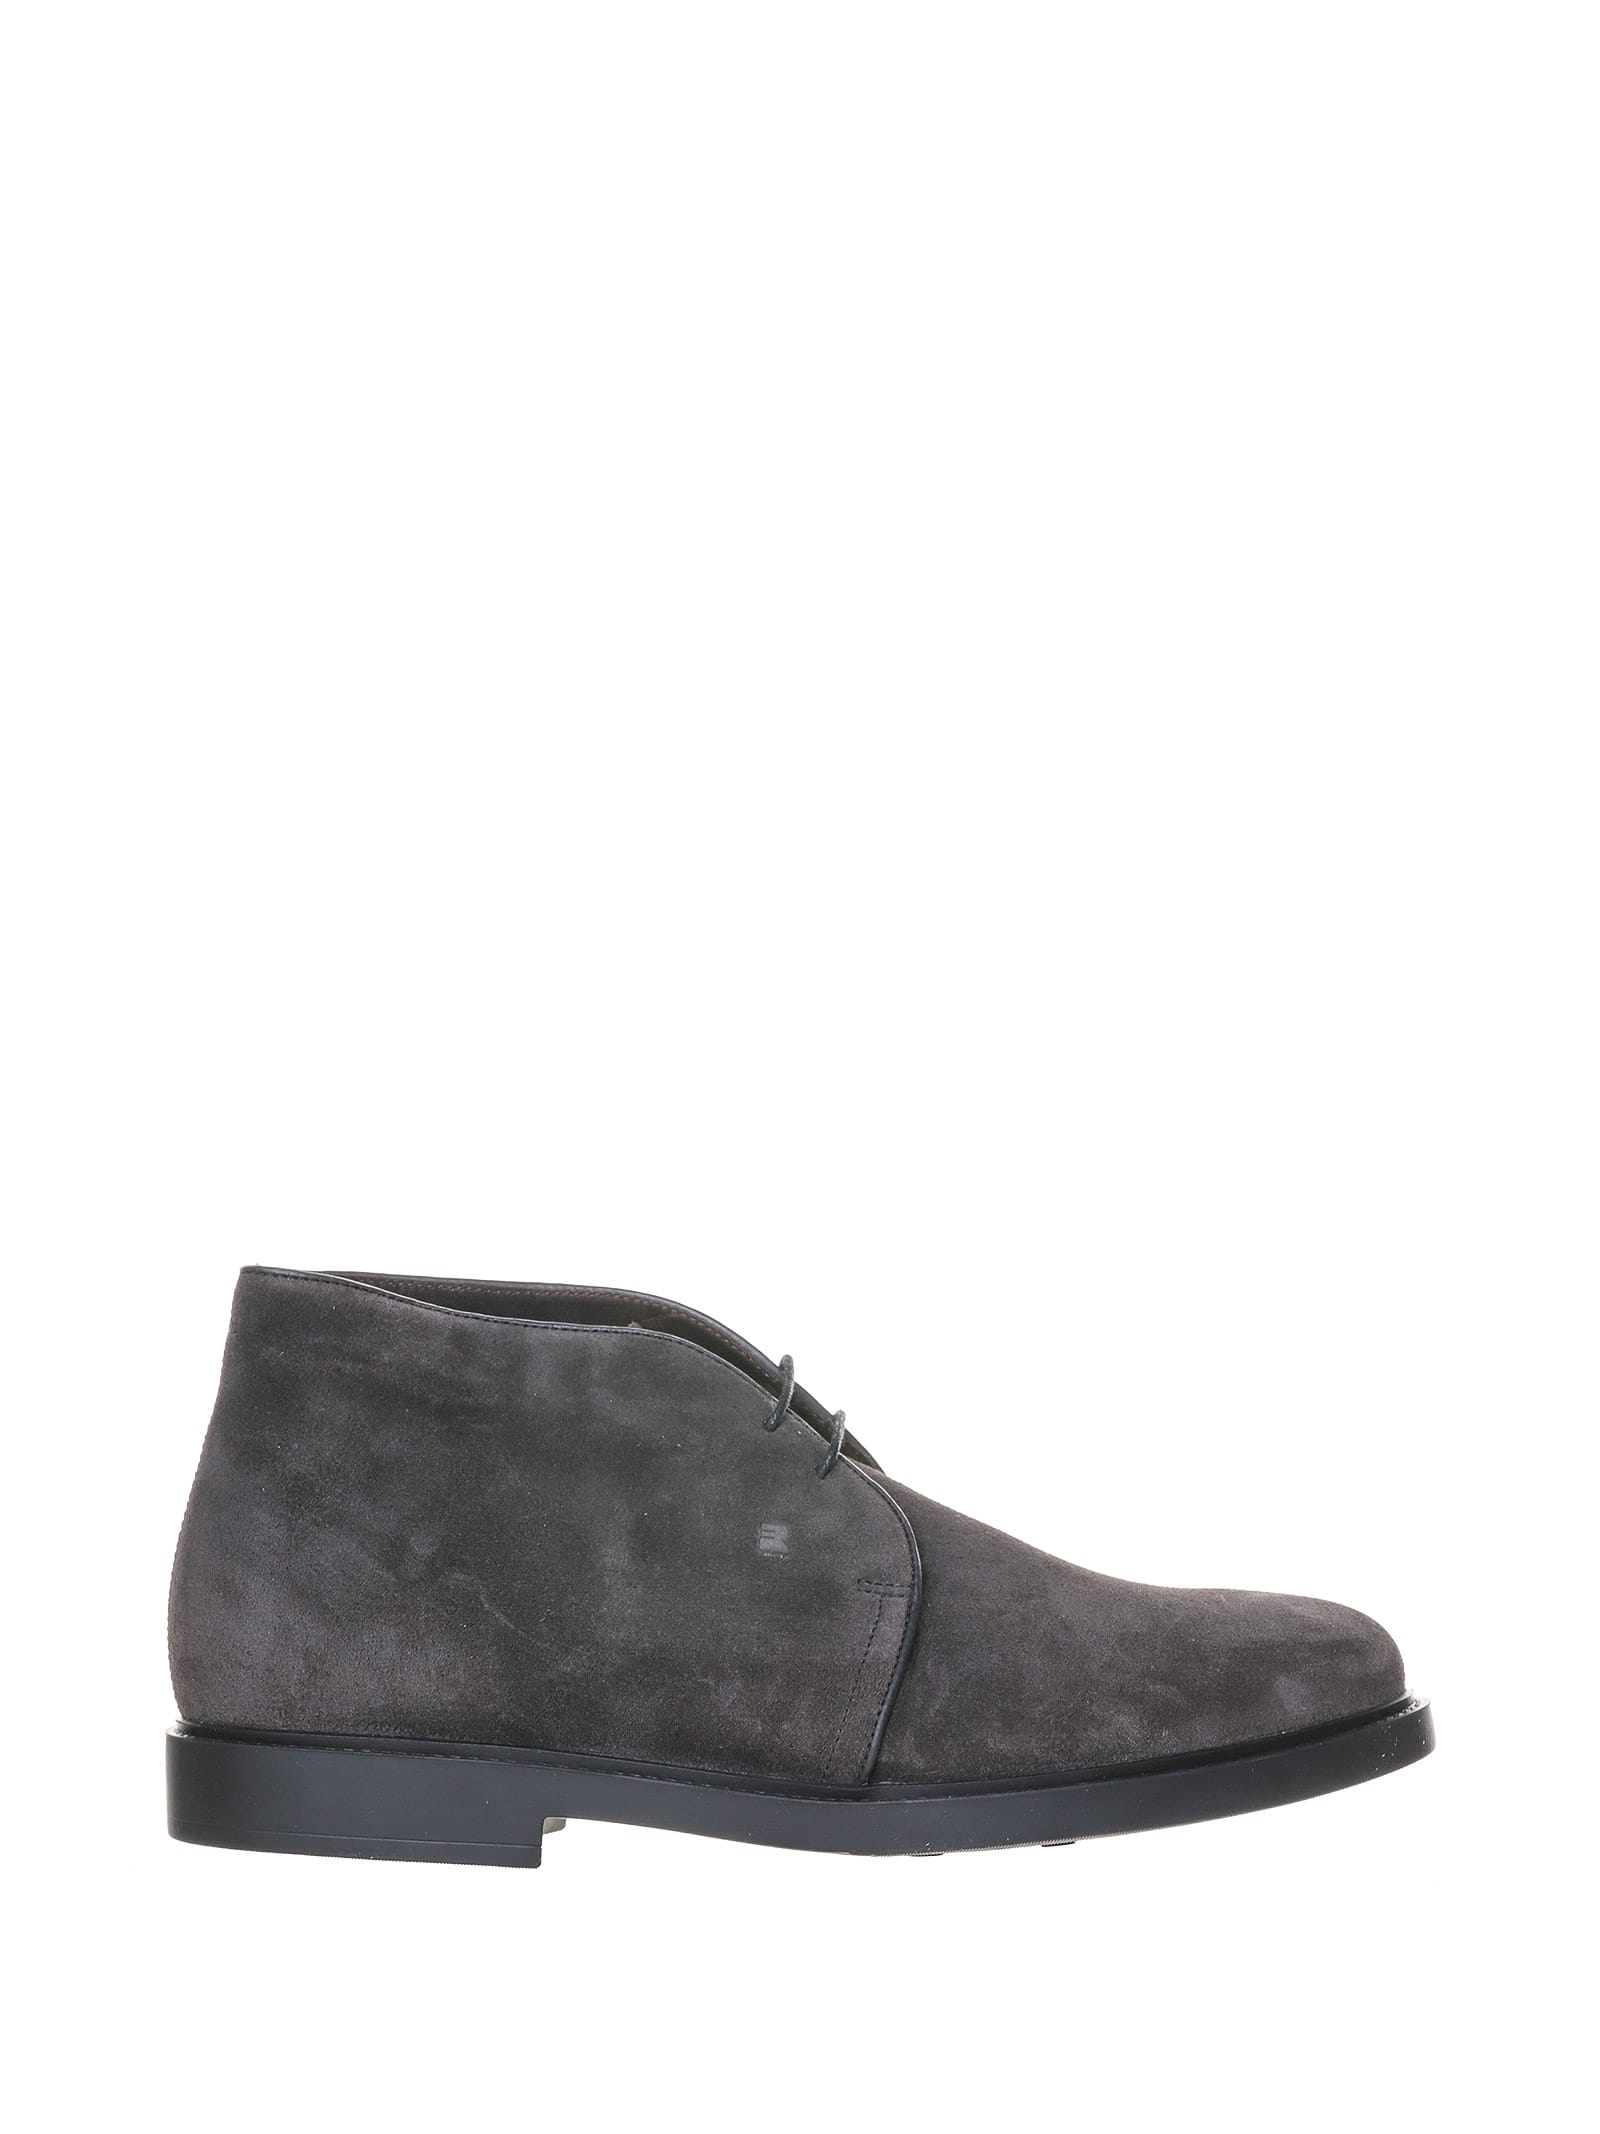 Fratelli Rossetti One Suede Ankle Boots In Grigio | ModeSens